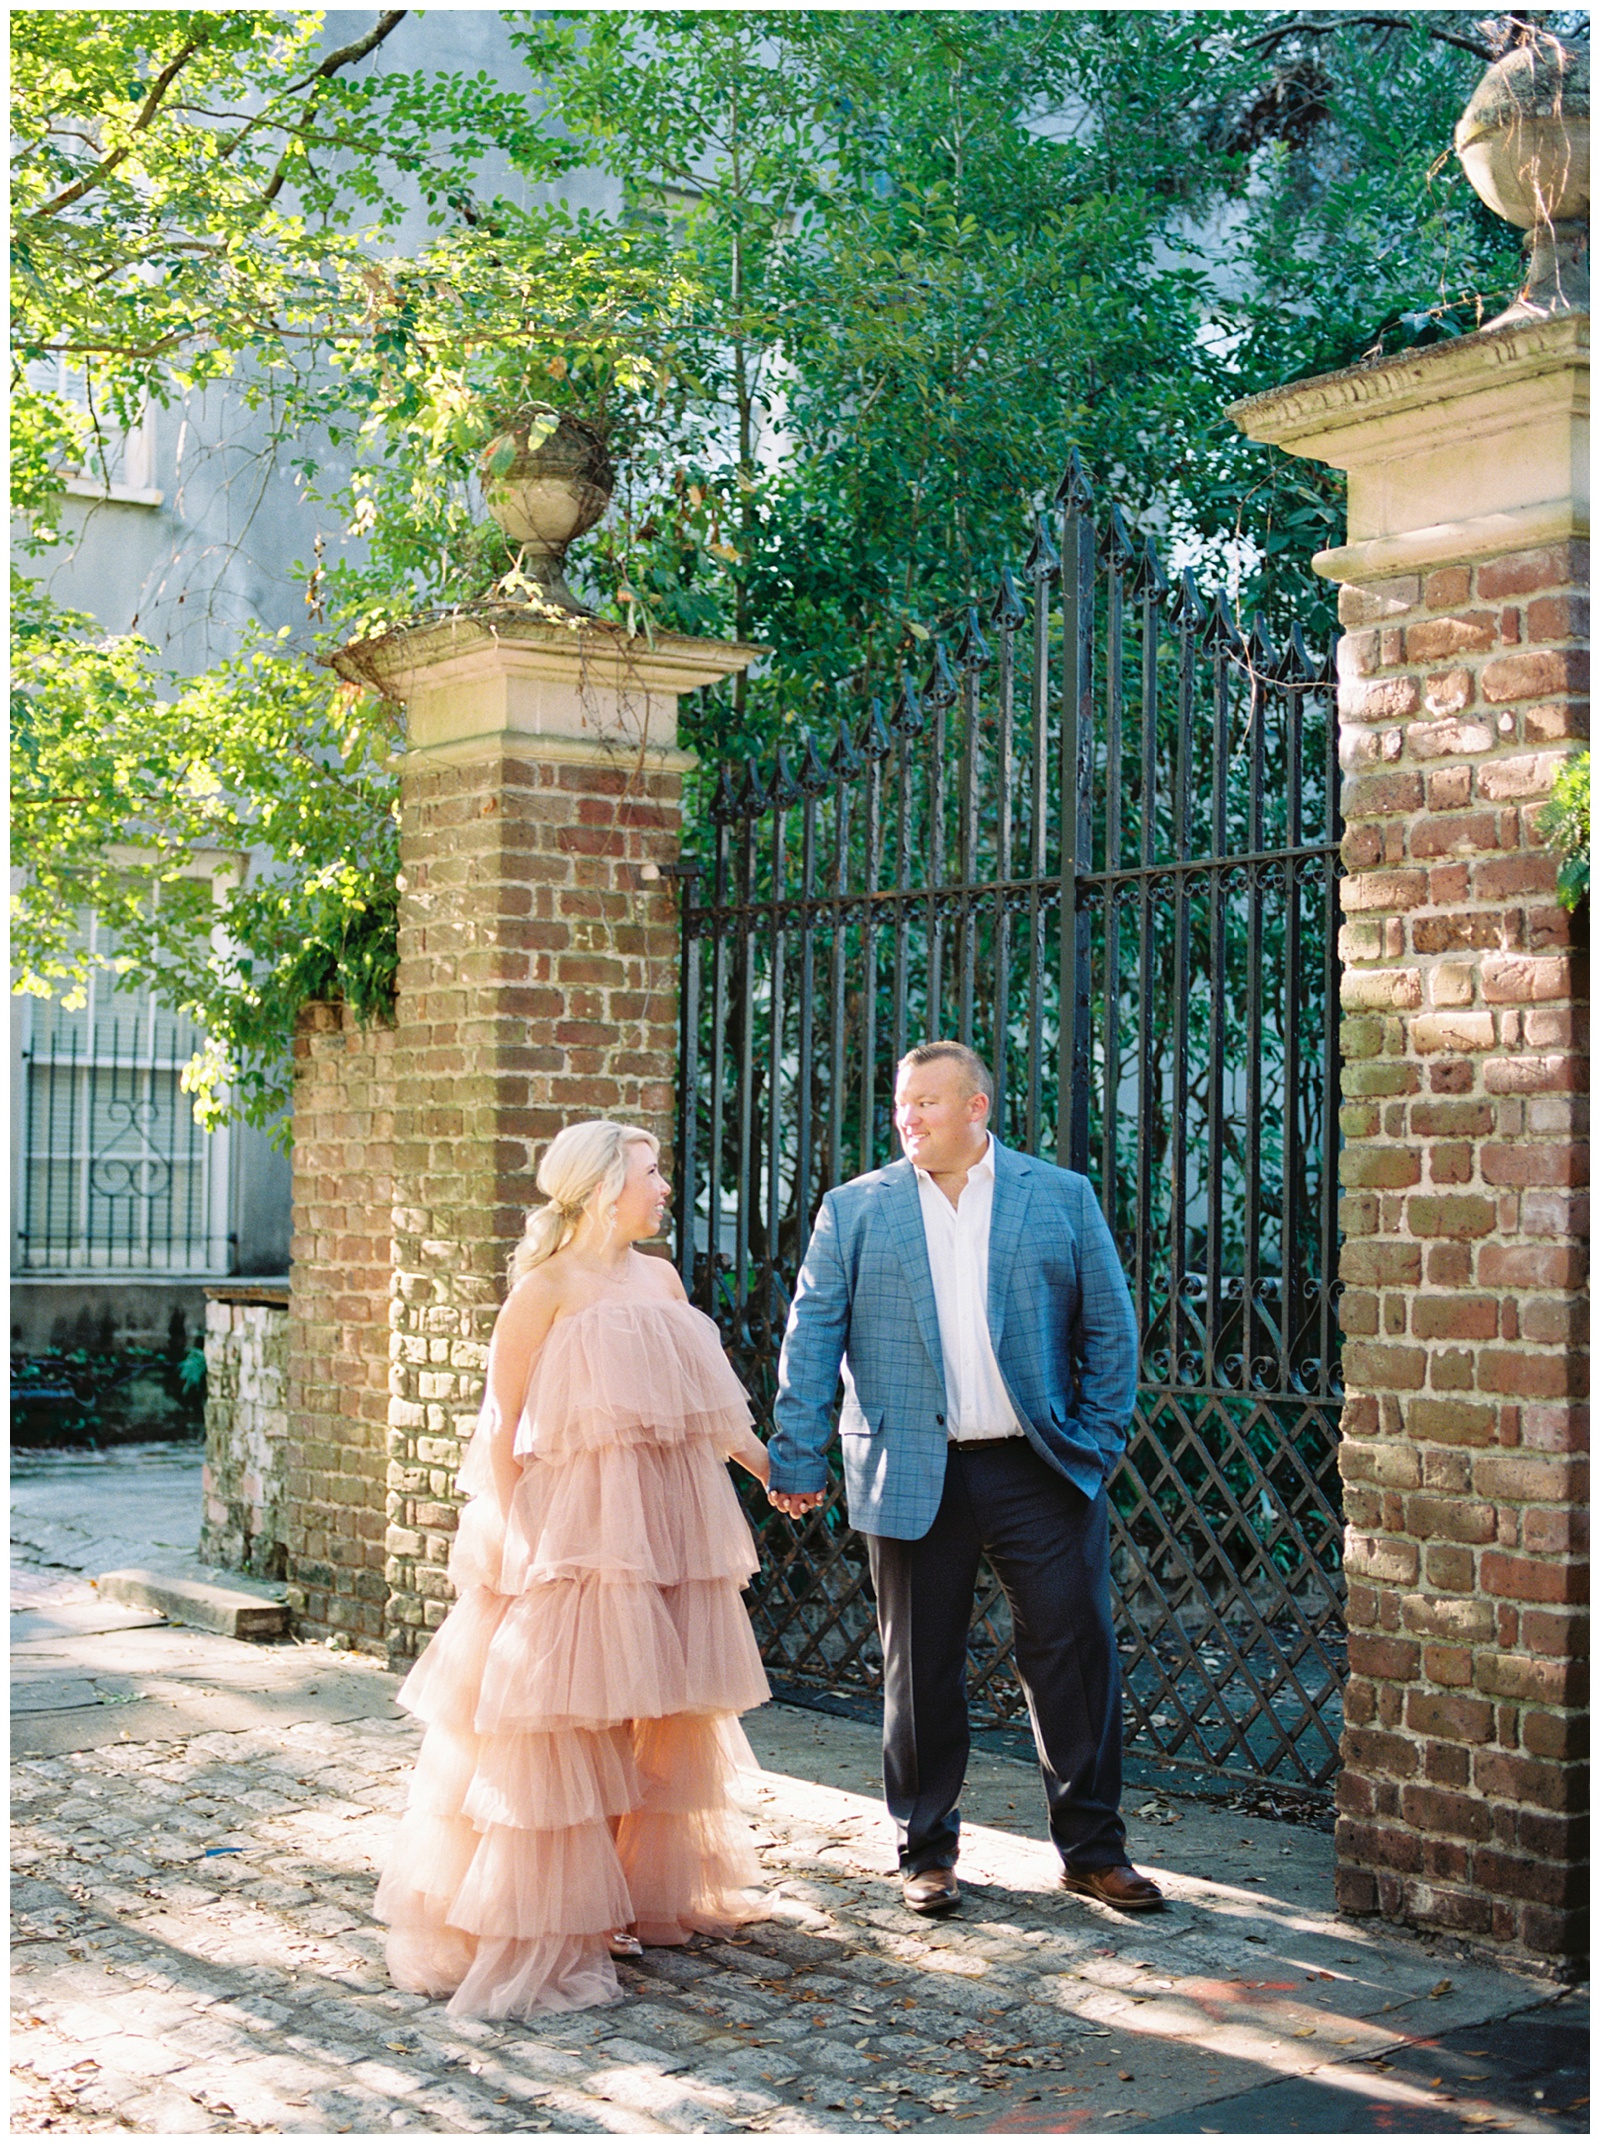 Downtown Charleston engagement session with bride in statement dress from Untamed Petals